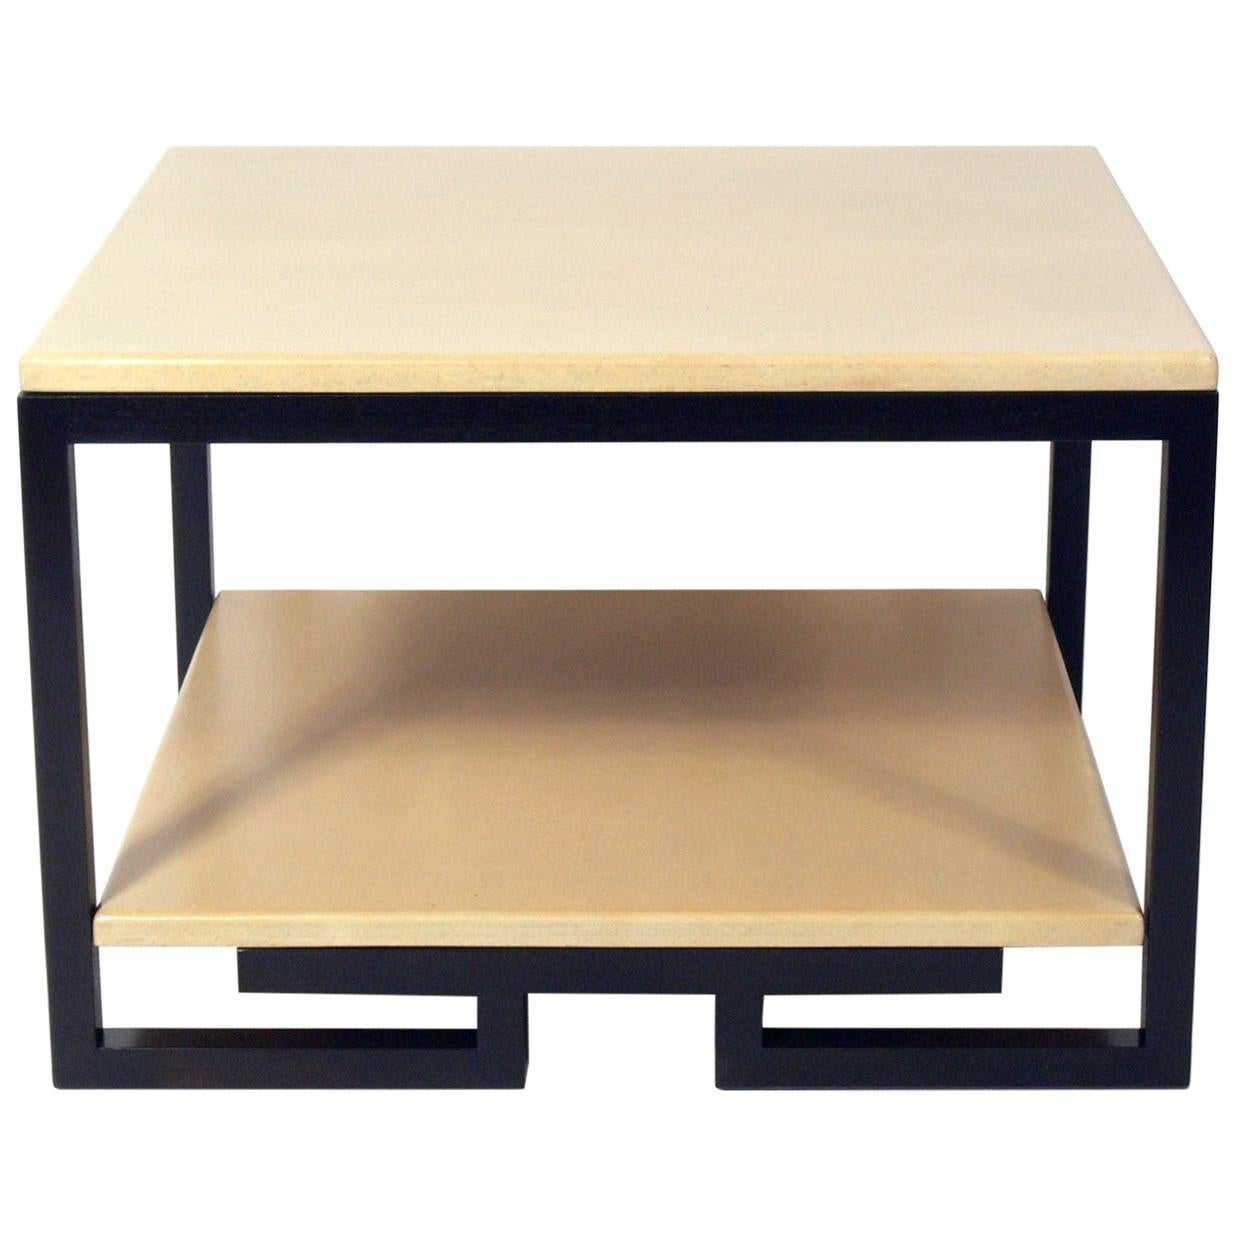 Paul Frankl Lacquered Cork Table